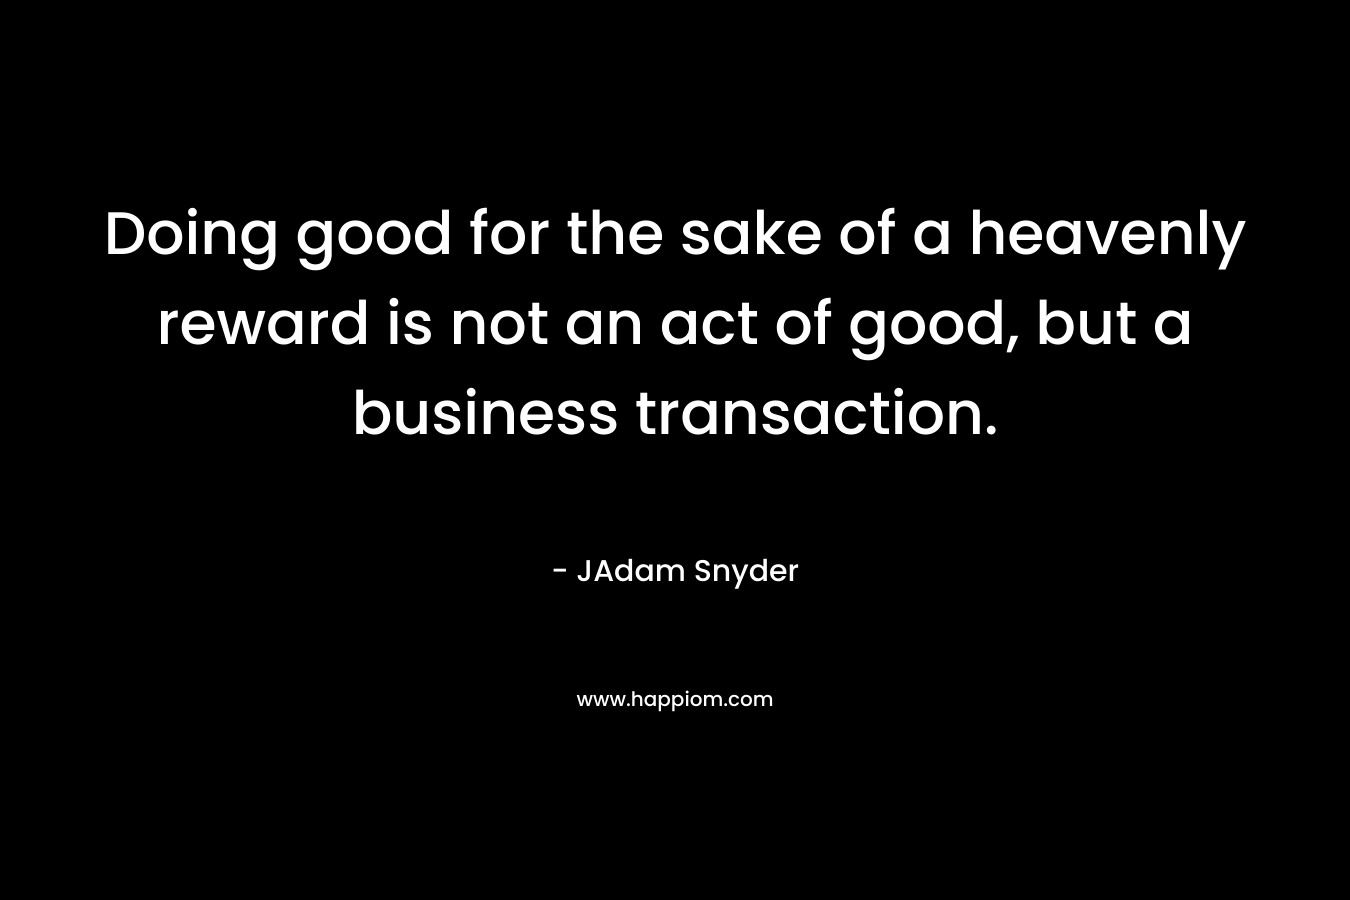 Doing good for the sake of a heavenly reward is not an act of good, but a business transaction.